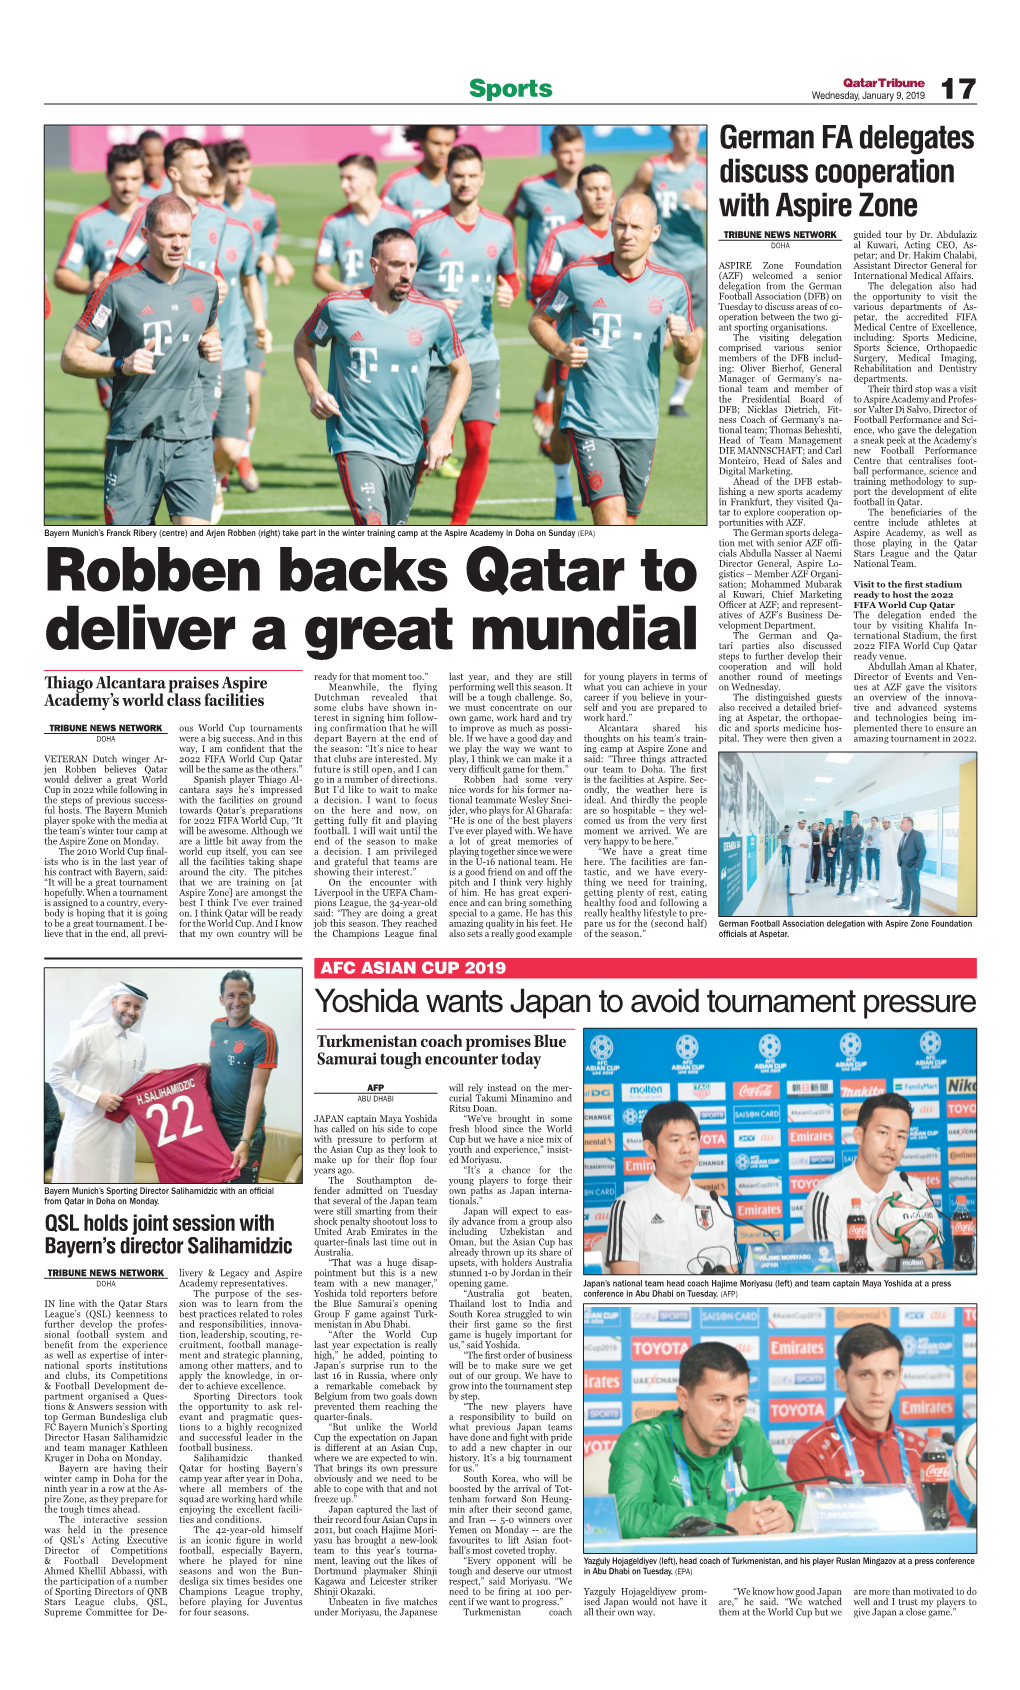 Robben Backs Qatar to Deliver a Great Mundial